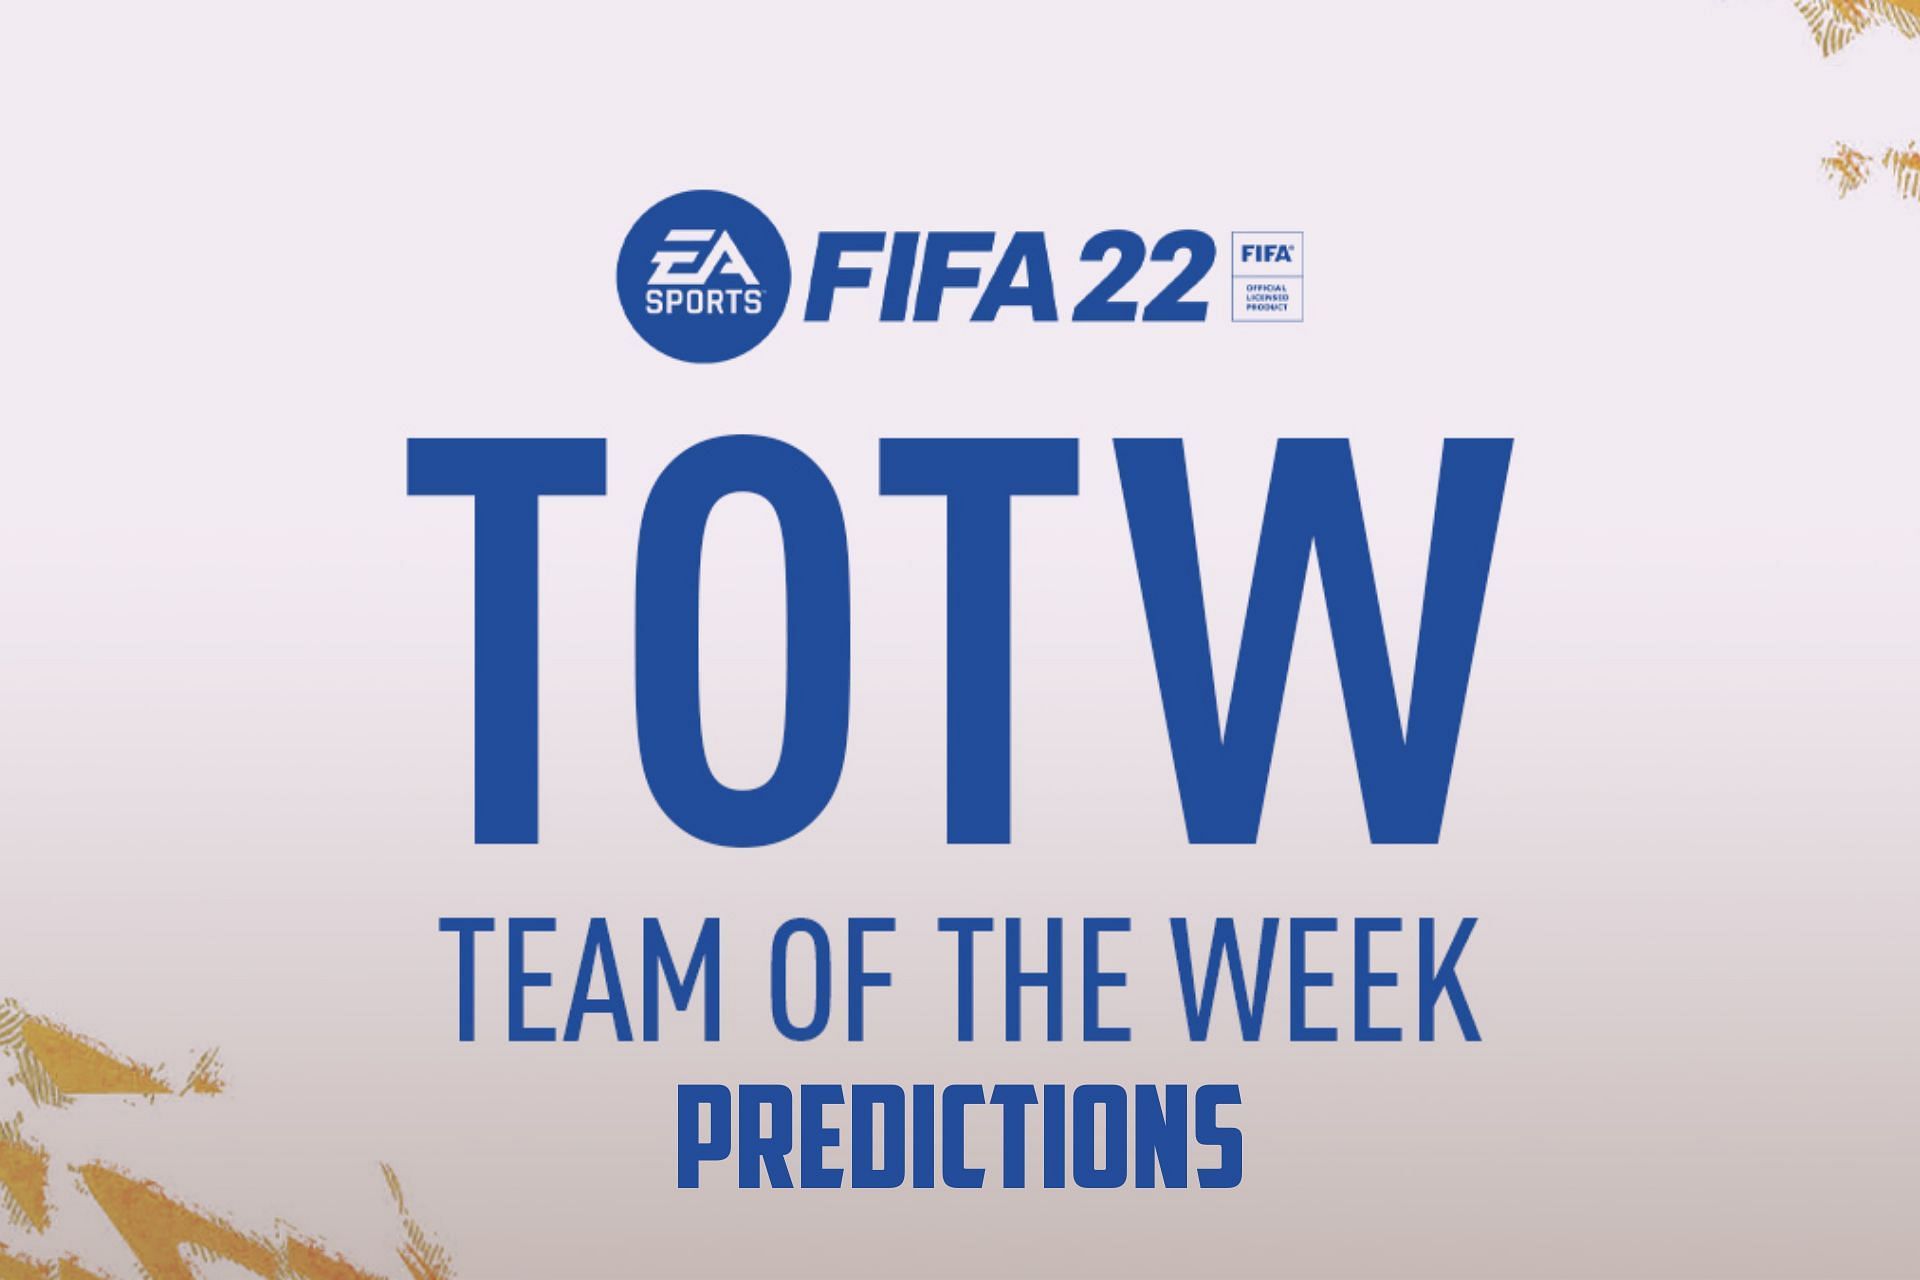 Team of the Week predictions for Week 6 FIFA 22